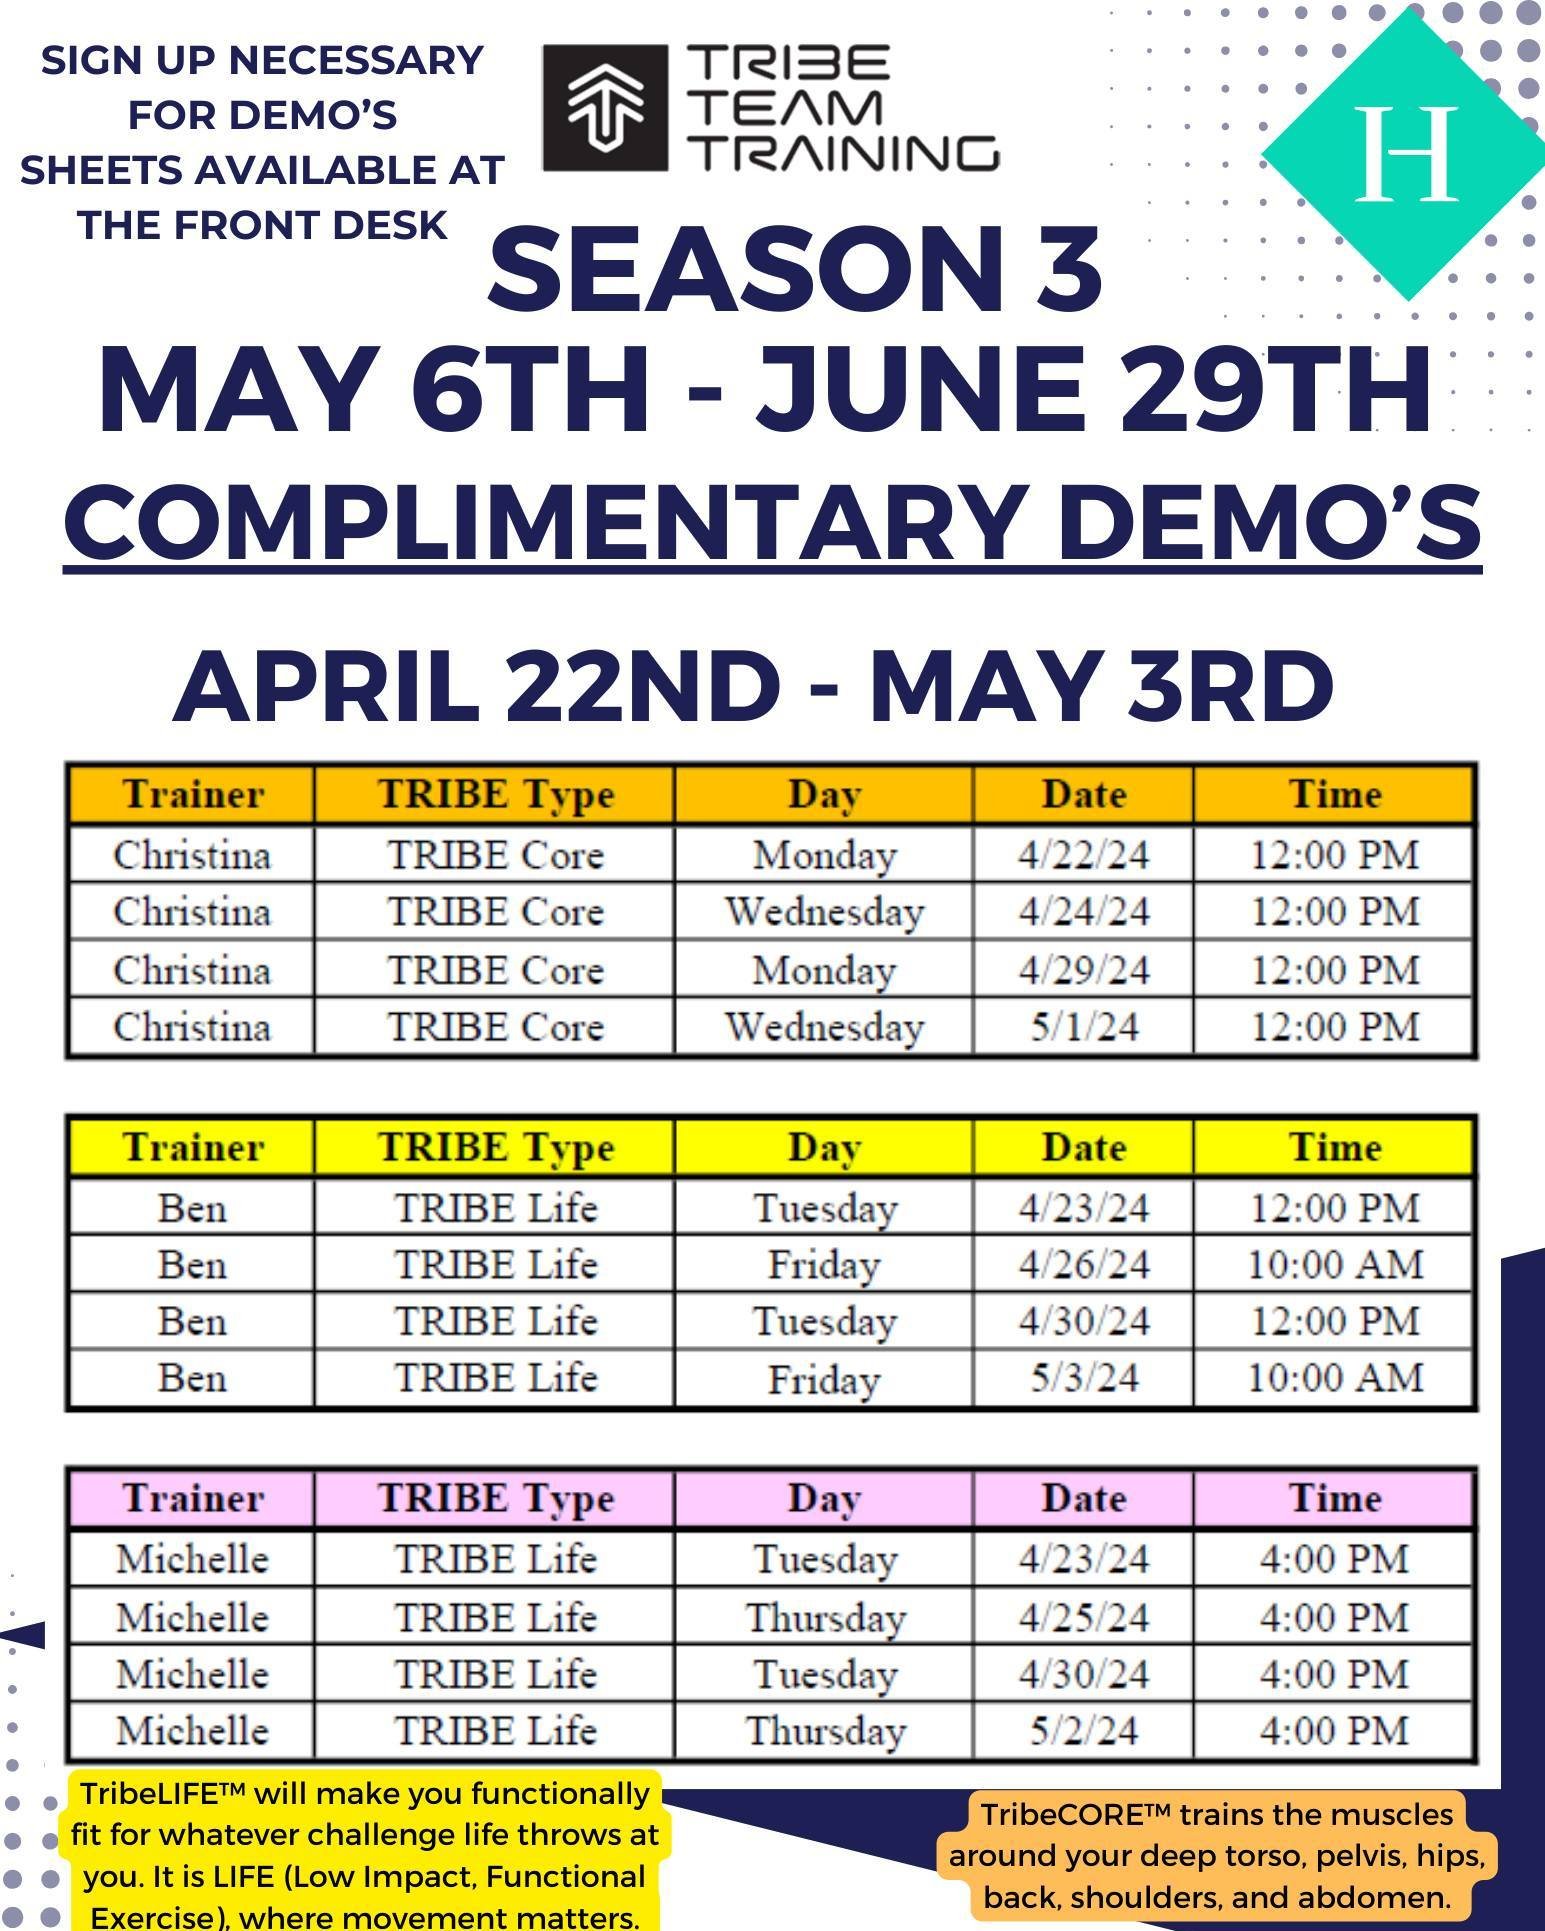 Come see what this exciting program is all about. 

We ask that you sign up for demo's so please sign up for your demo at the front desk, the upstairs fitness desk or outside the Wellness Studio (upstairs). 

You can also email Michelle at mhatzberge